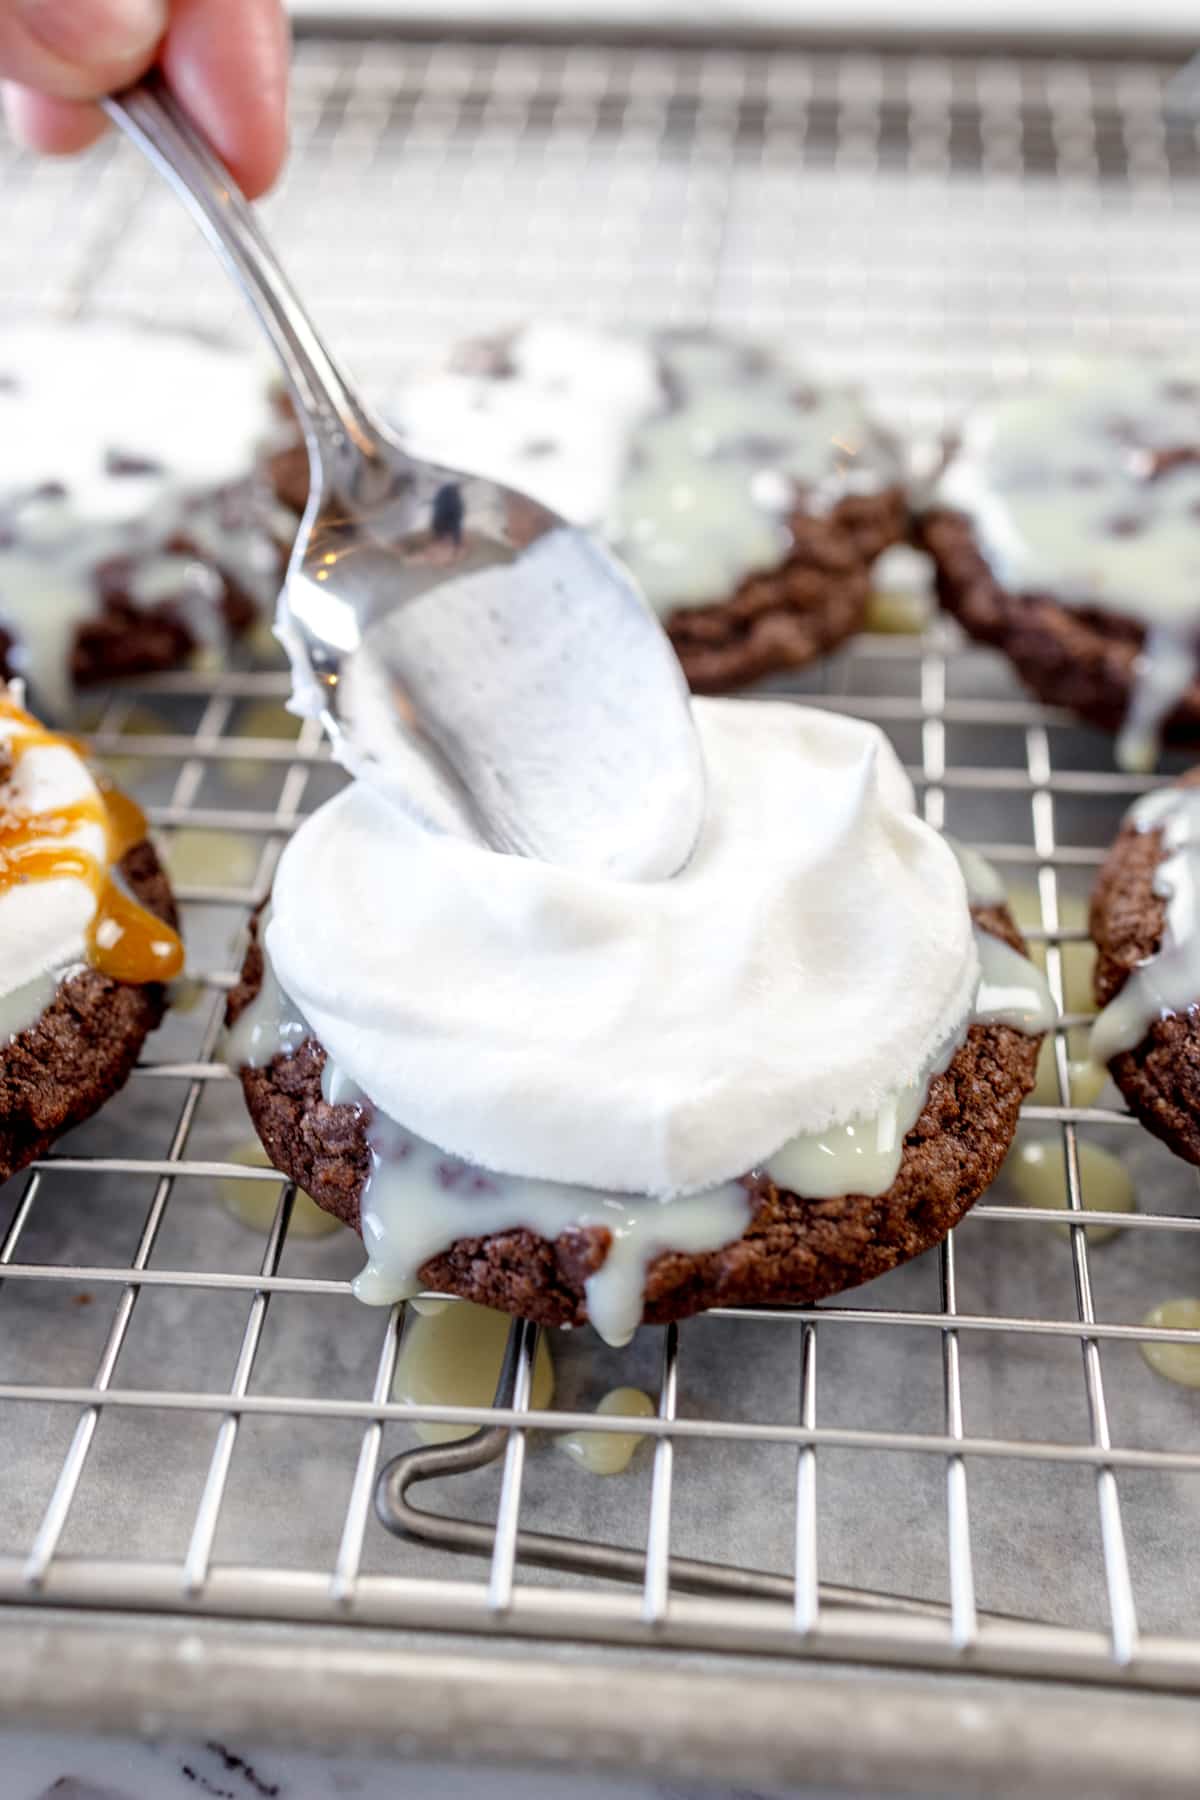 Close up of a spoon patting down whipped cream on top of icing on a chocolate cookie on a wire rack.